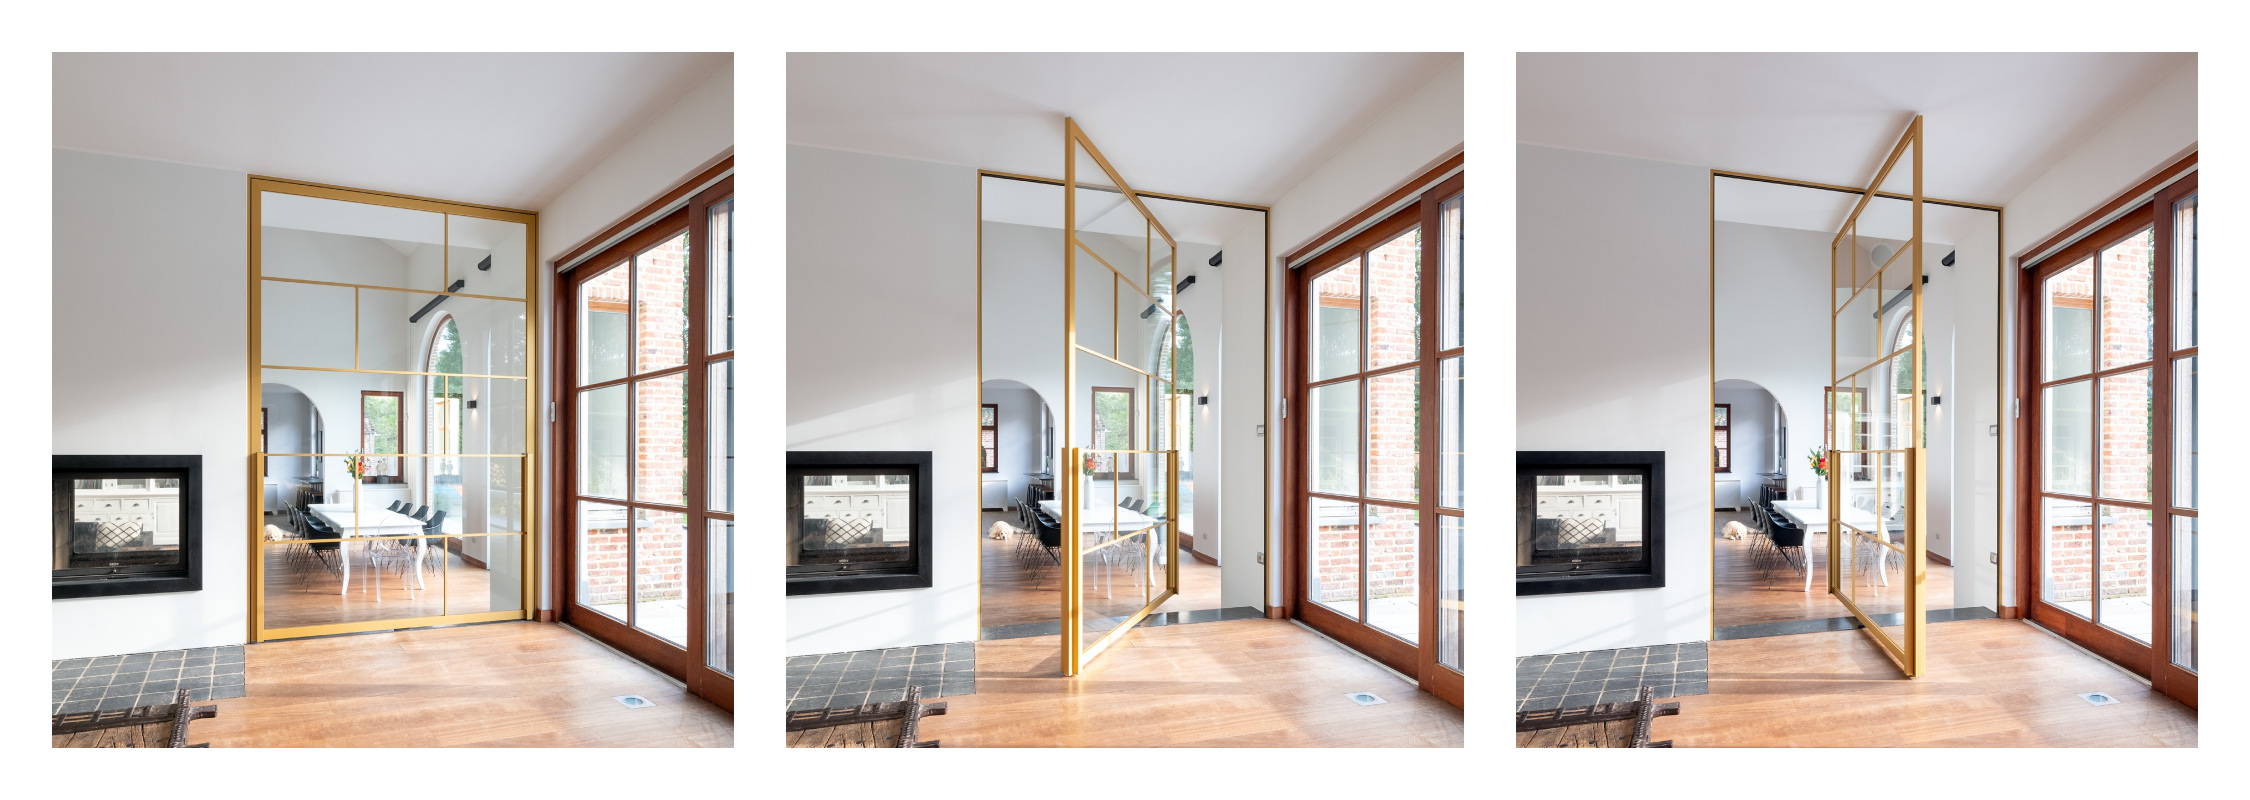 Gold pivot door with central axis 360° pivot hinge system